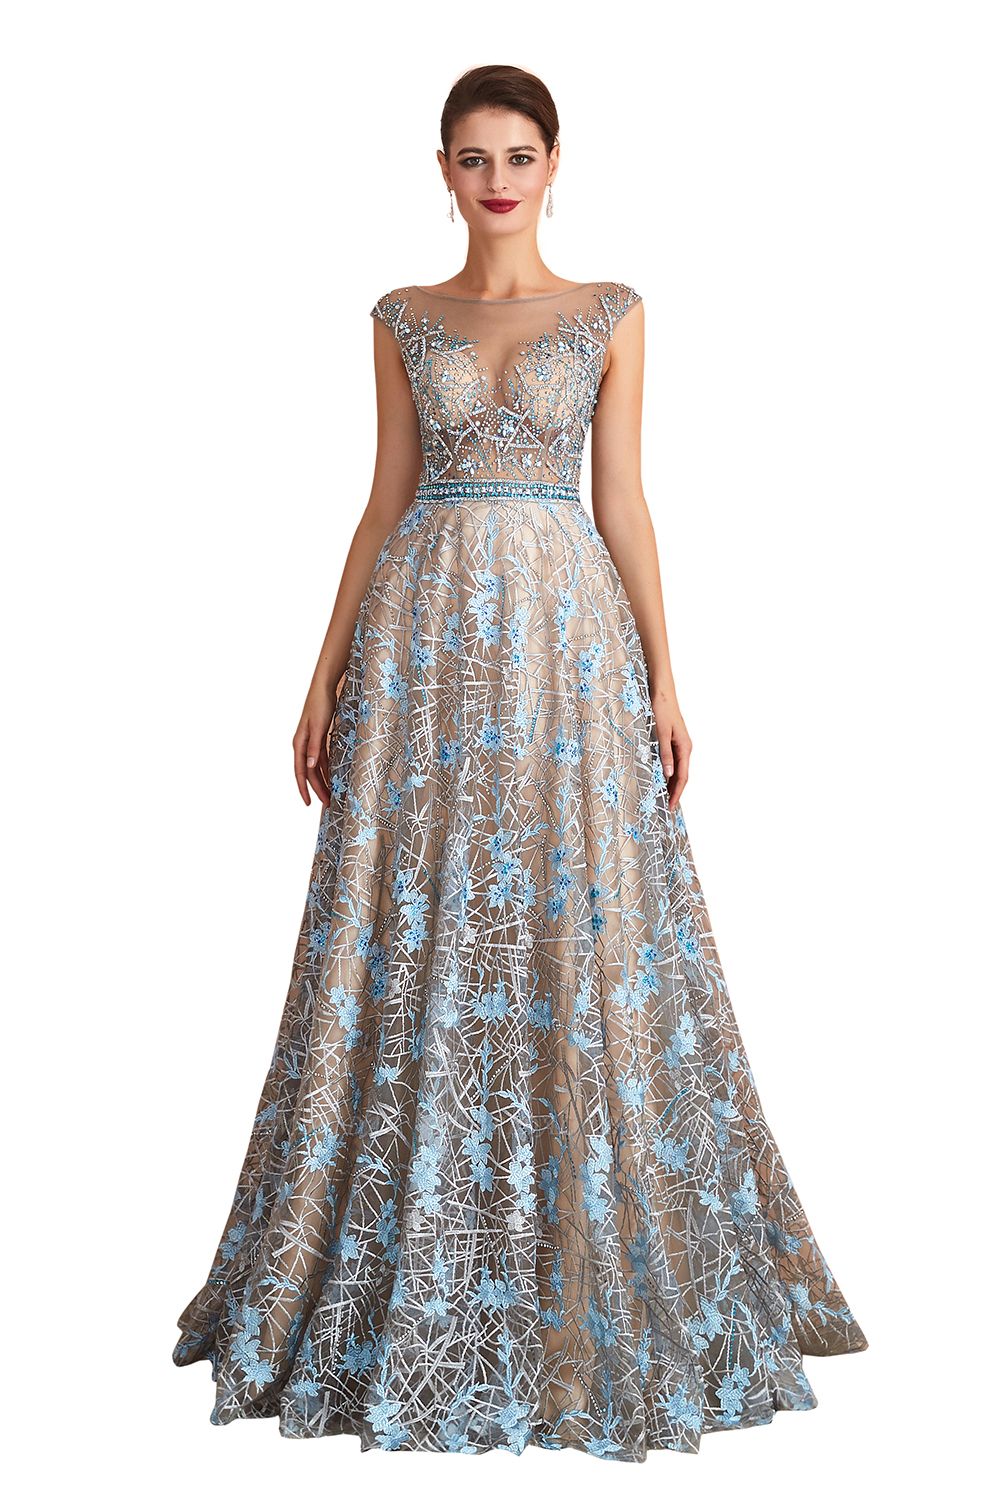 BMbridal Designer Cap Sleeves Crystal Long Prom Dress With Blue Appliques On Sale